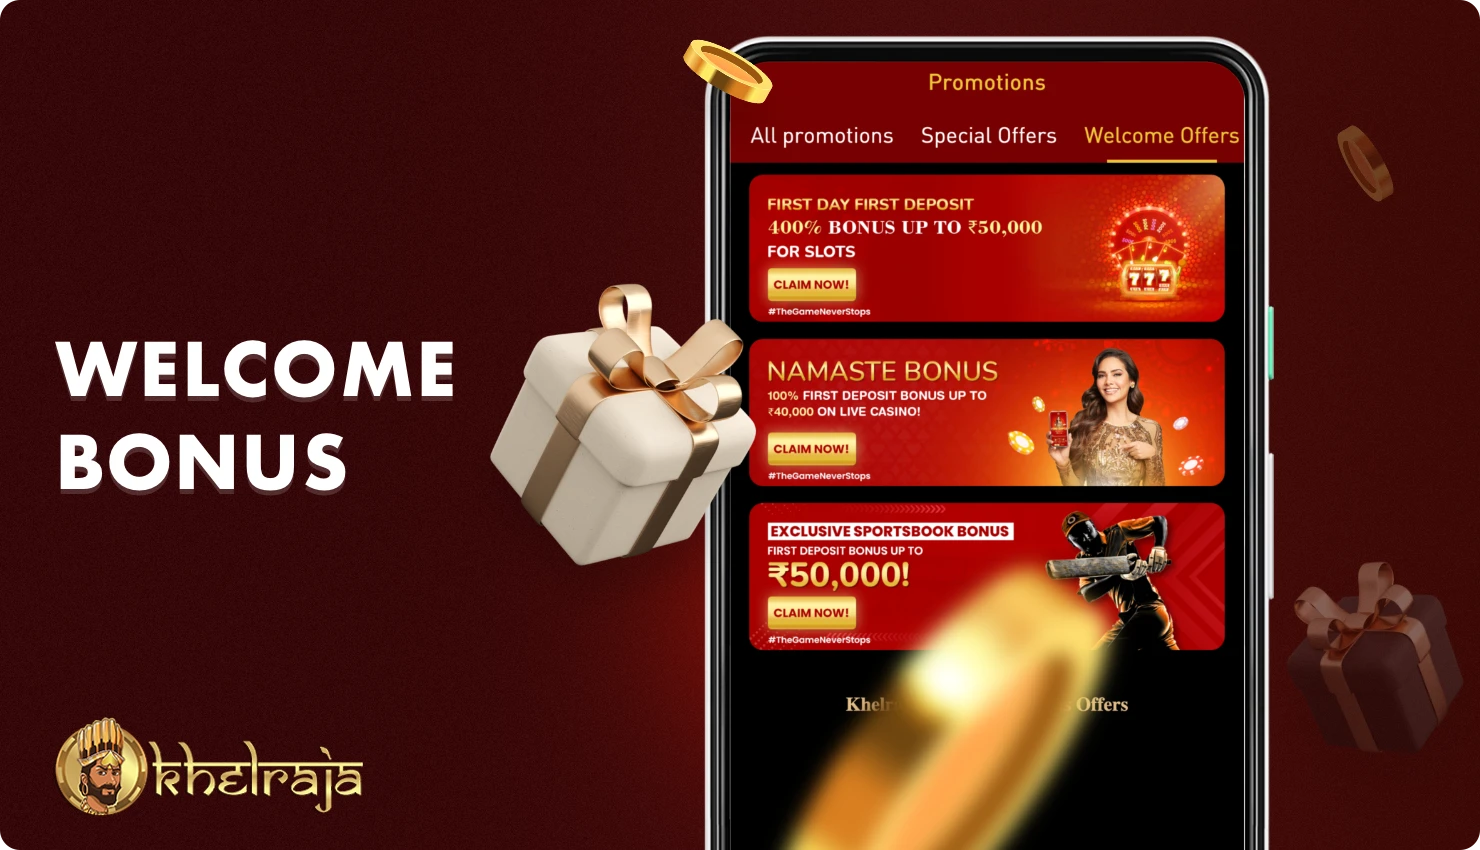 The Khelraja Welcome Bonus is also available to mobile users from India